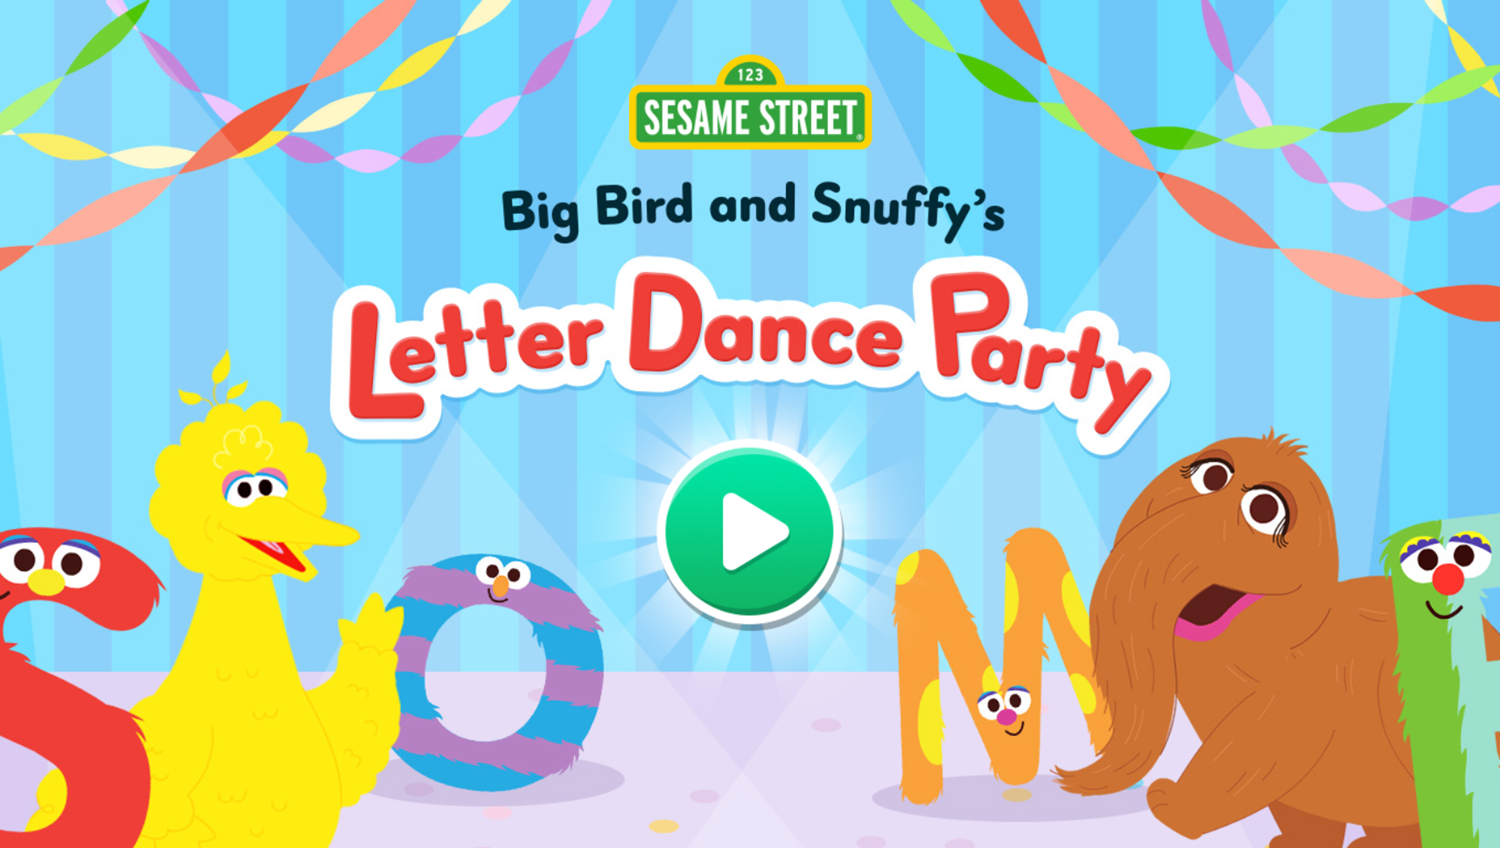 Sesame Street Big Bird and Snuffy's Letter Dance Party Game Welcome Screen Screenshot.